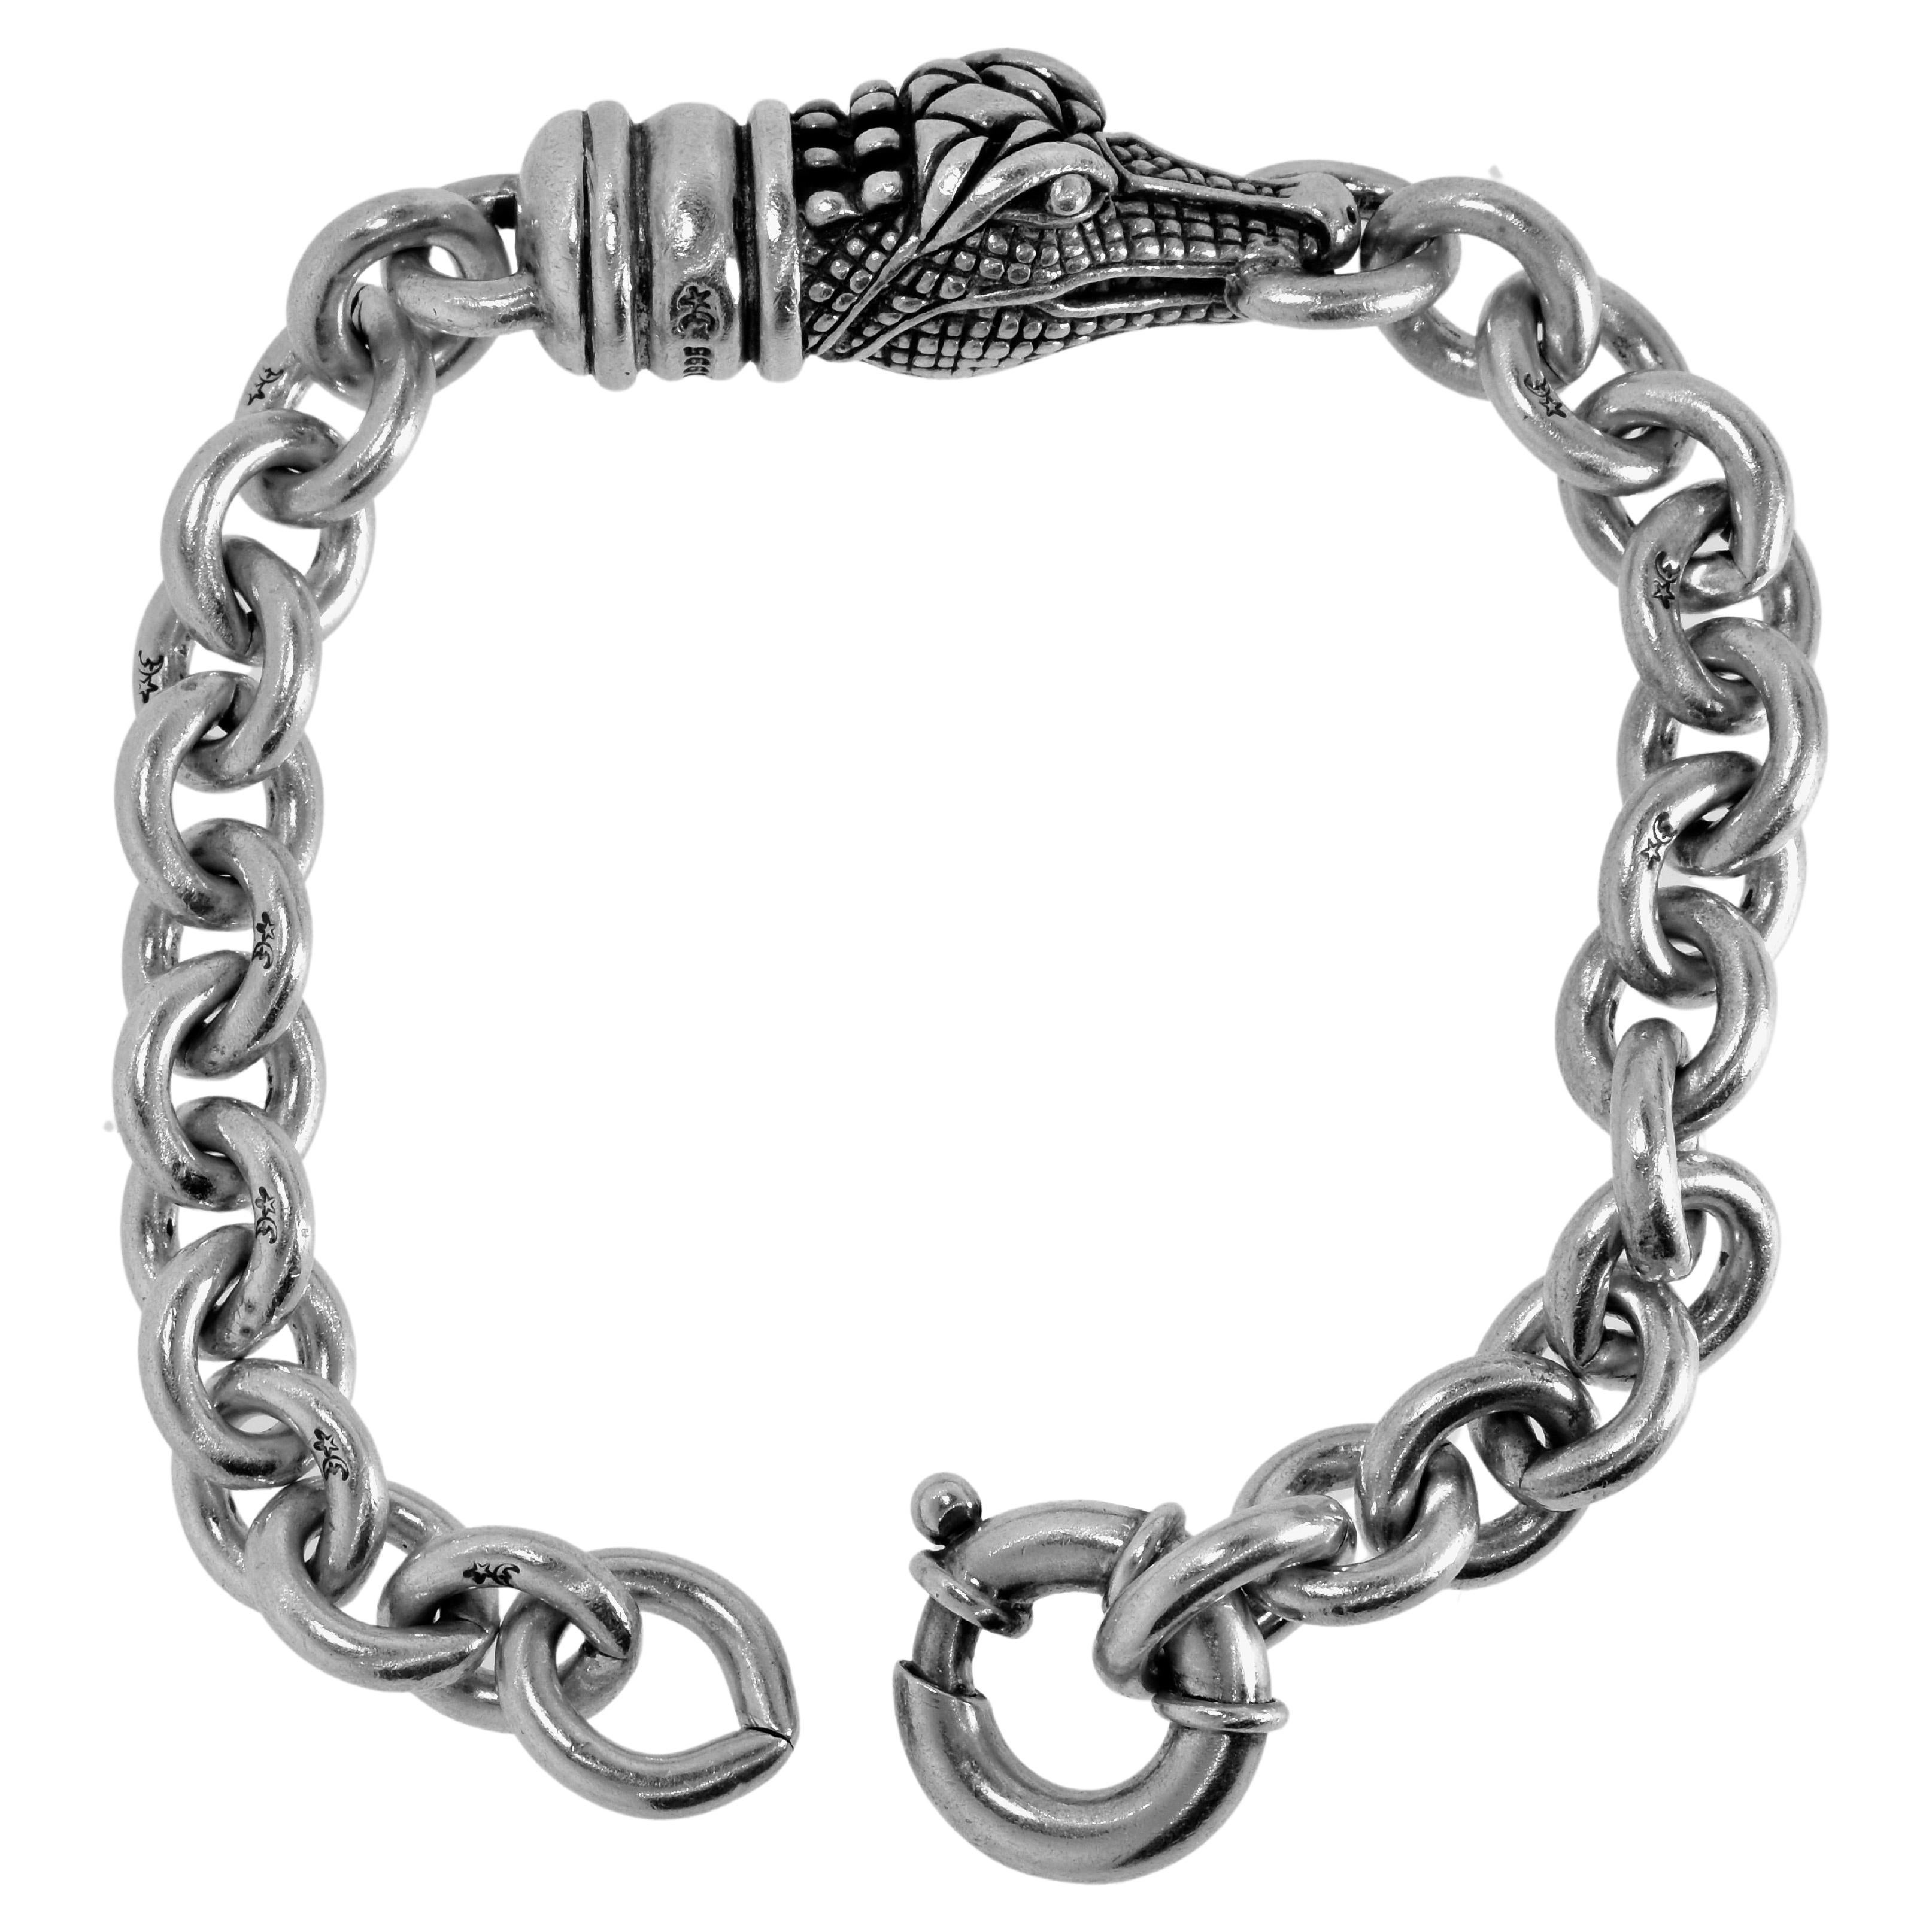 Barry Kieselstein-Cord sterling silver alligator link bracelet, c 1995.  While the alligator is a recurring motif, this bracelet is an unusual because of the link chain - usually one sees the alligator head bracelets  with braided cord in various